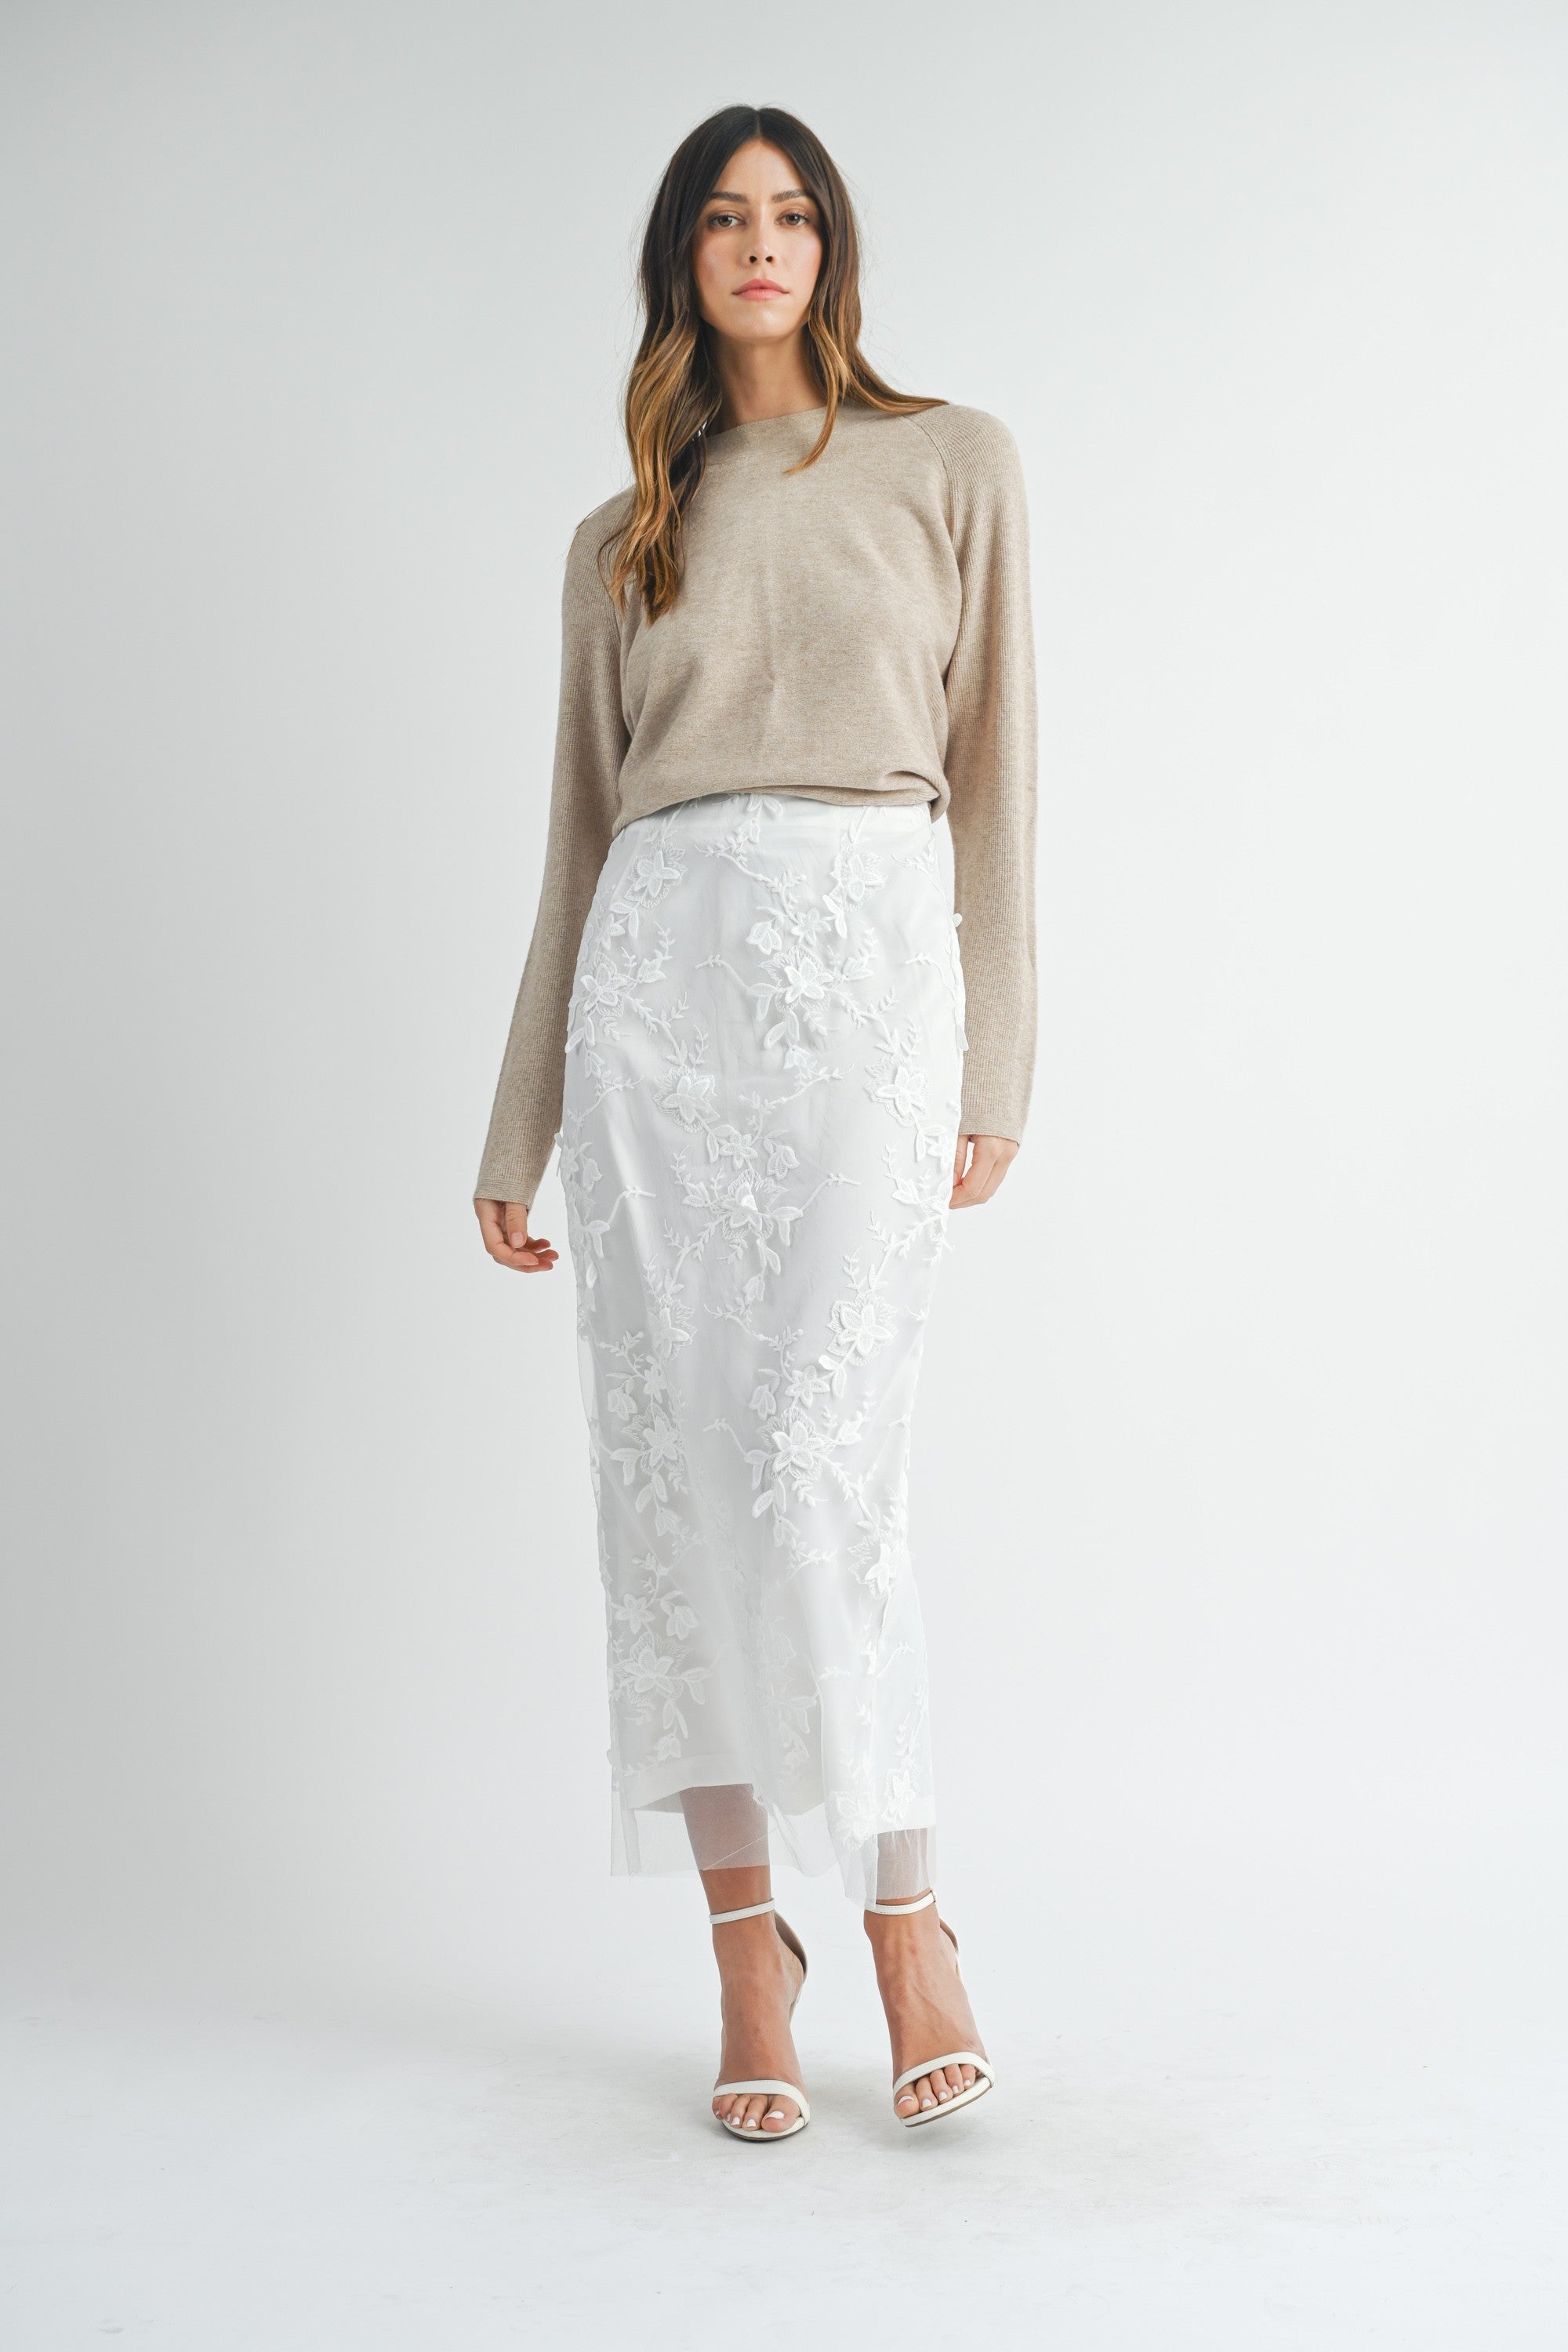 Floral Textured Midi Skirt | Collective Request 